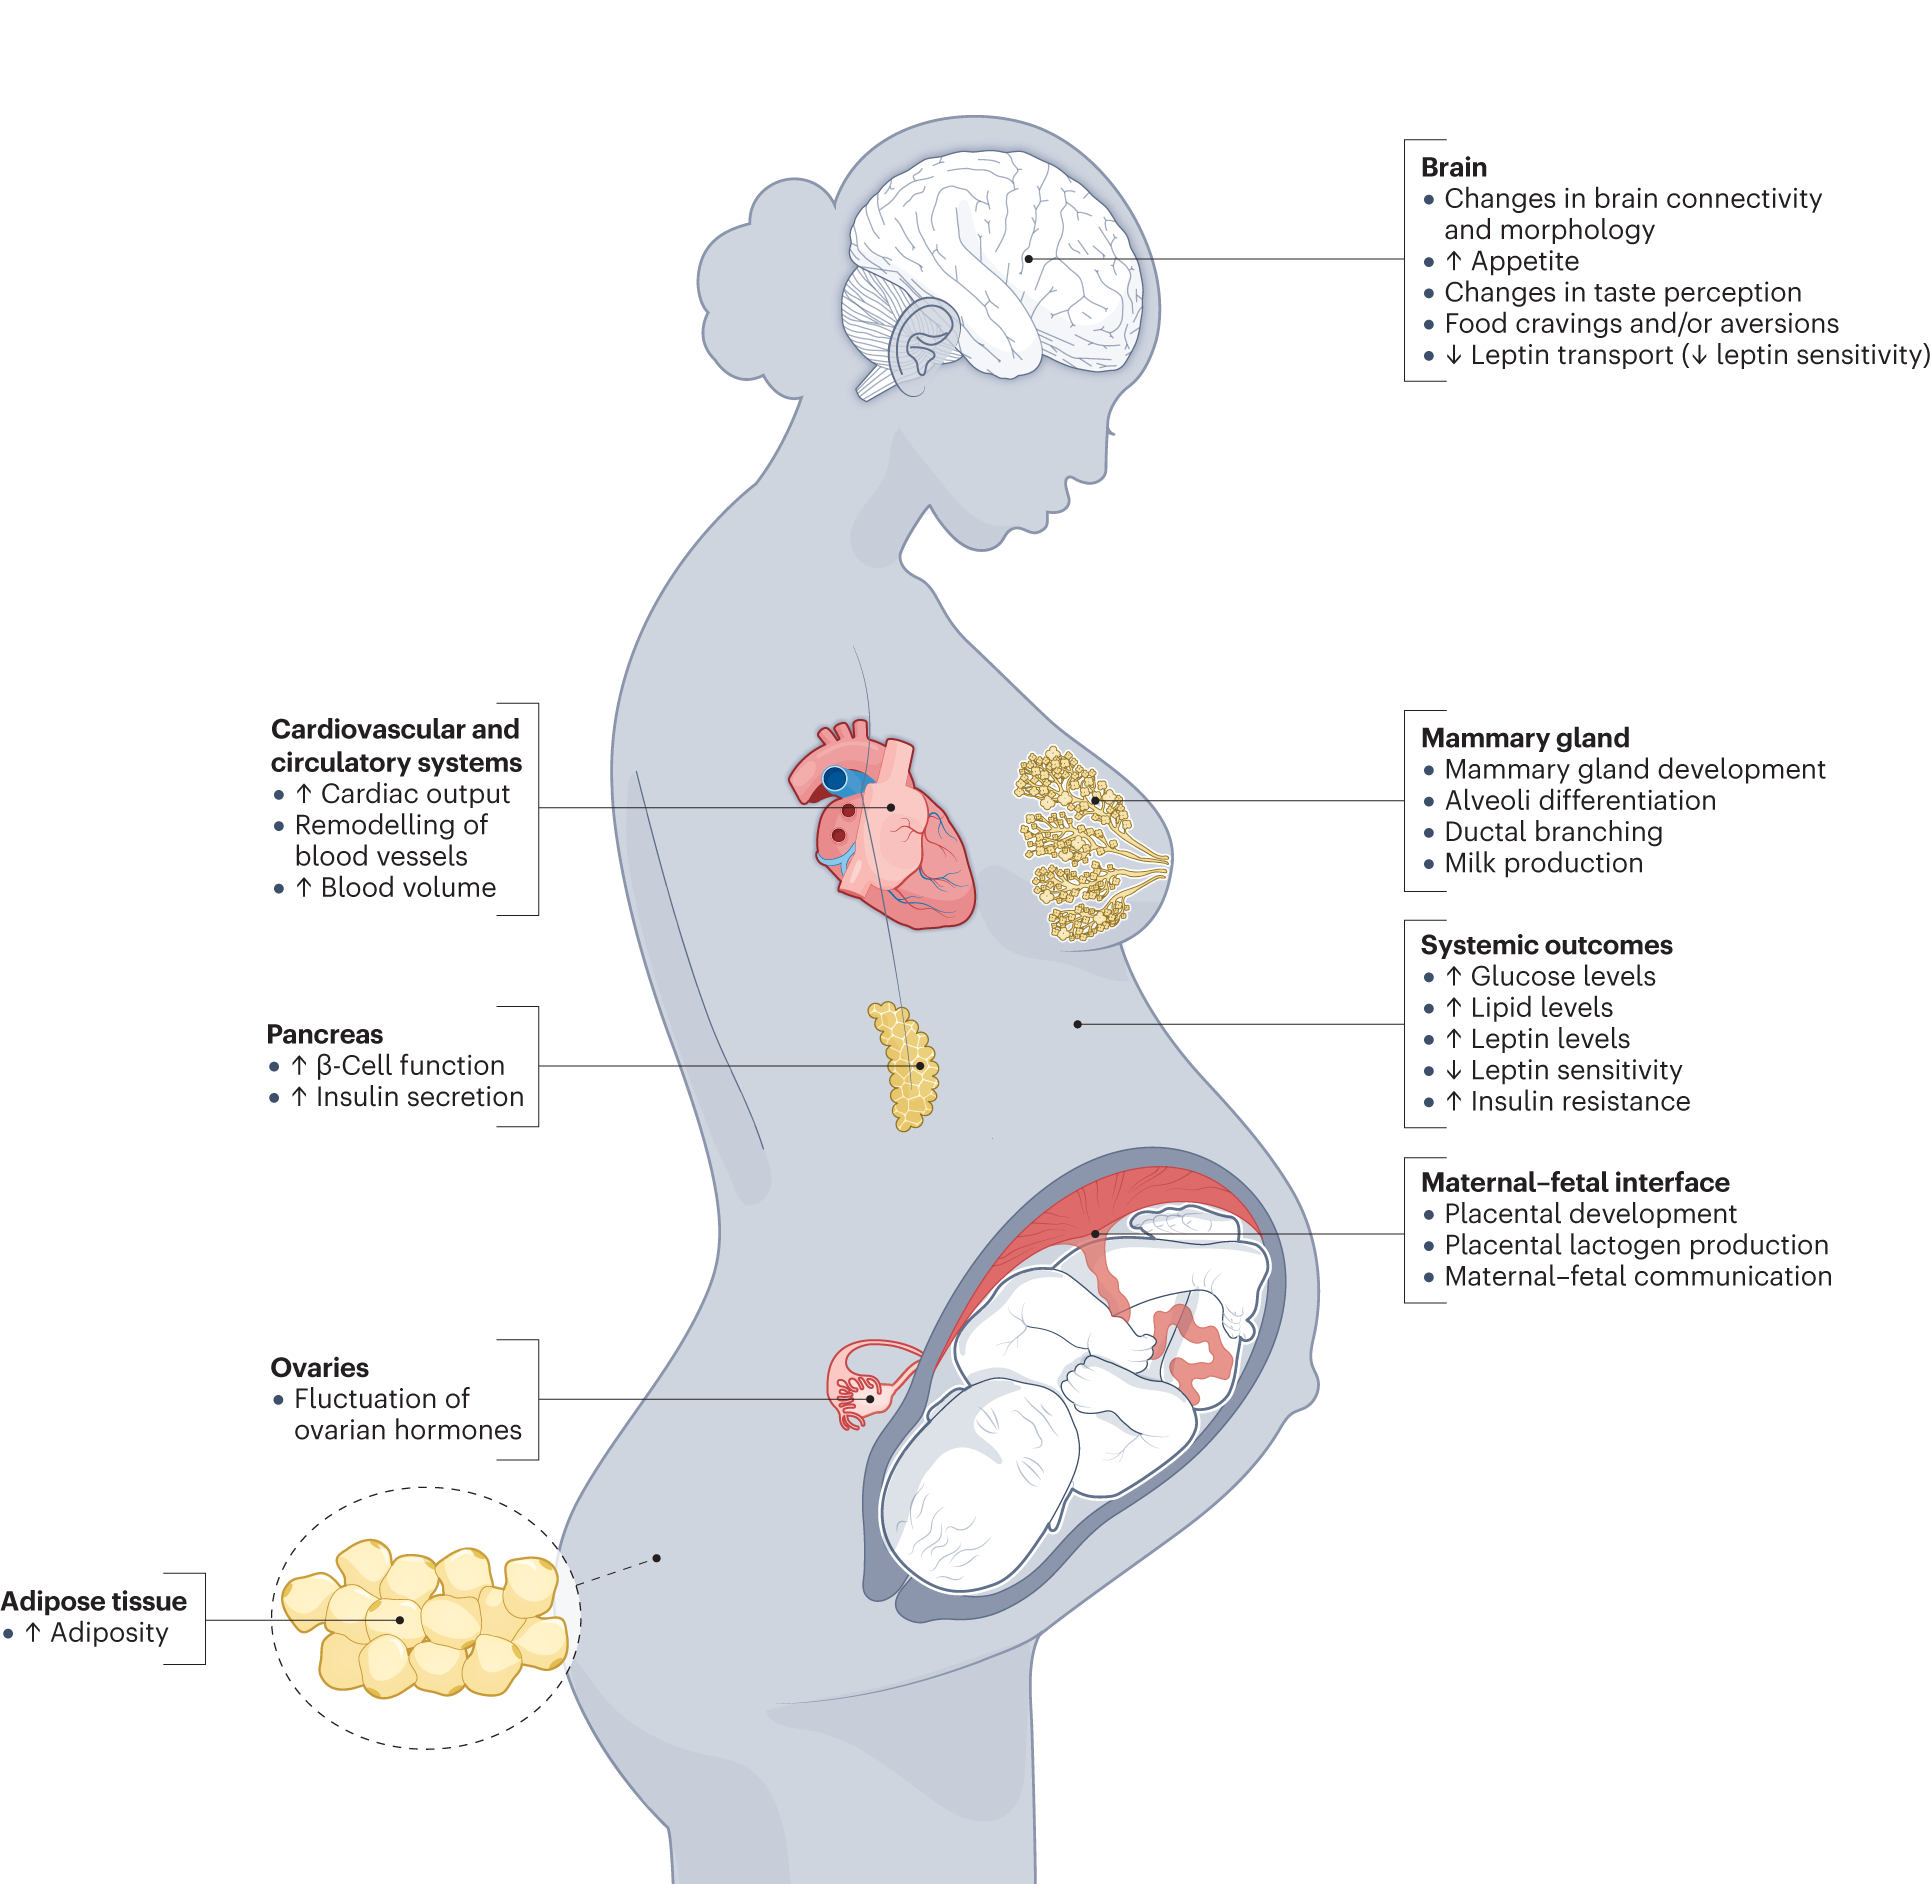 Metabolic and feeding adjustments during pregnancy Nature Reviews Endocrinology image